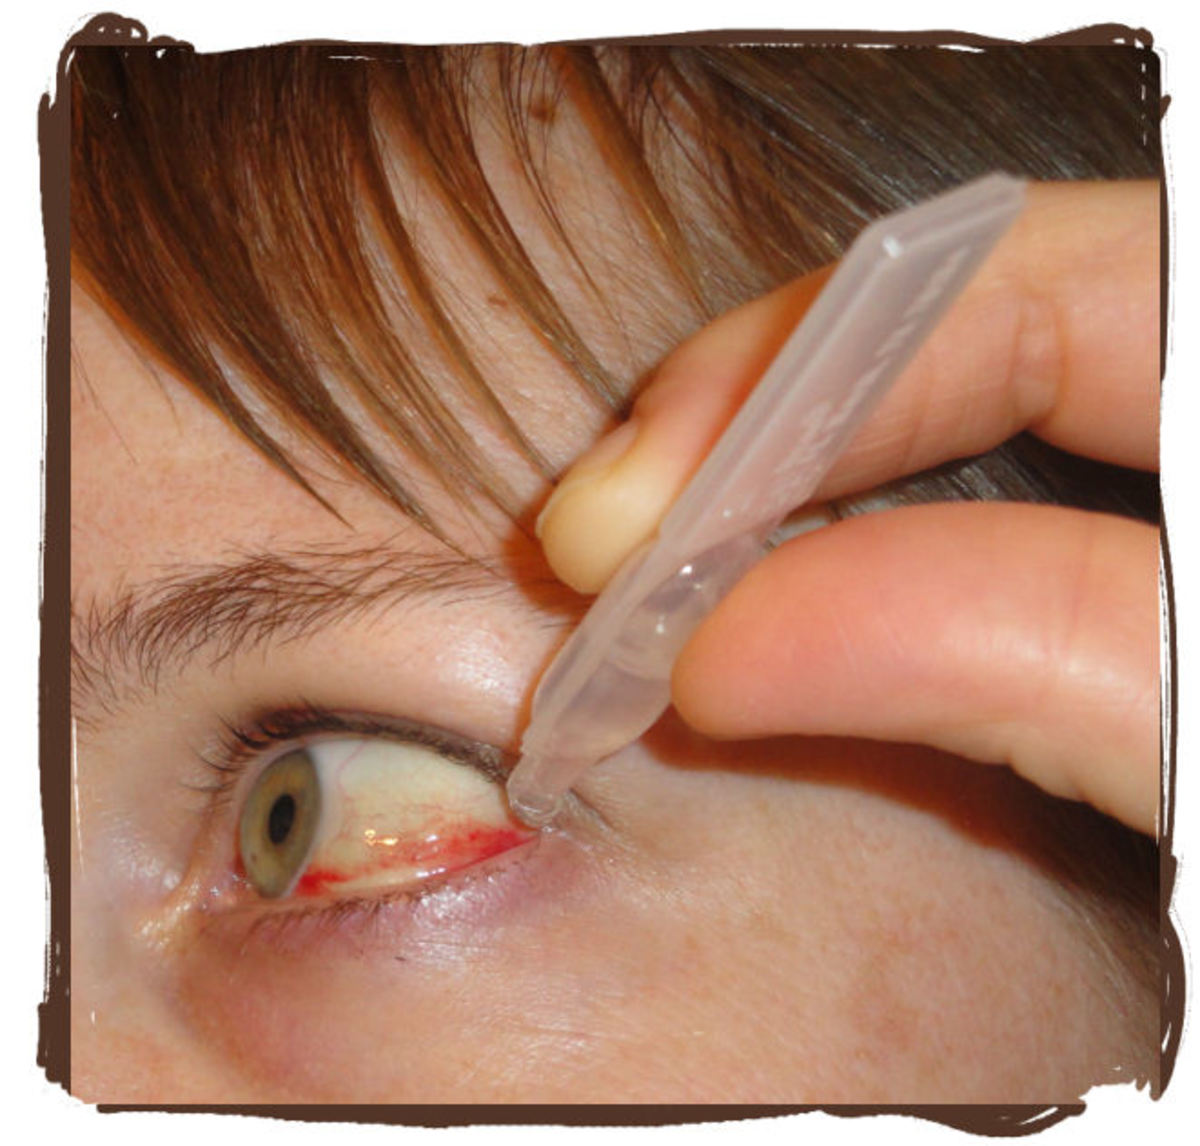 Since the broken blood vessel caused my eye to feel dry, and a little scratchy, the eye drops helped a little